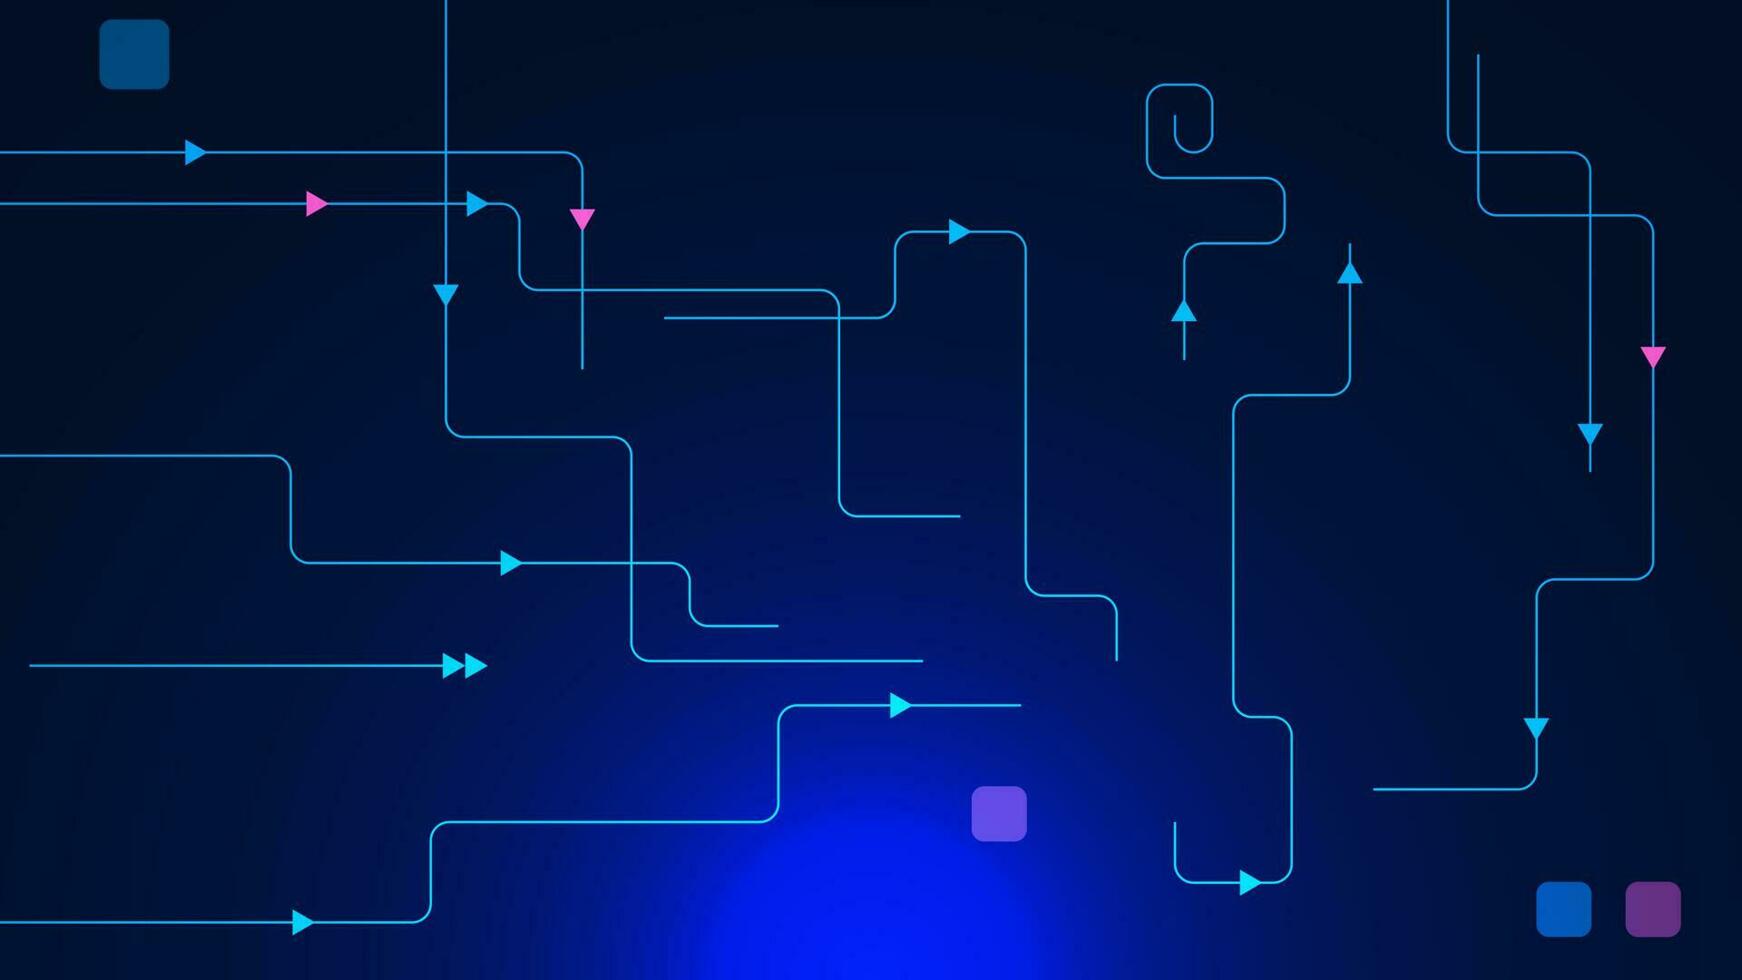 Glowing line and round shapes for digital technology concept on blue background. Innovation future data, technology light effect and abstract tech. Vector illustration.